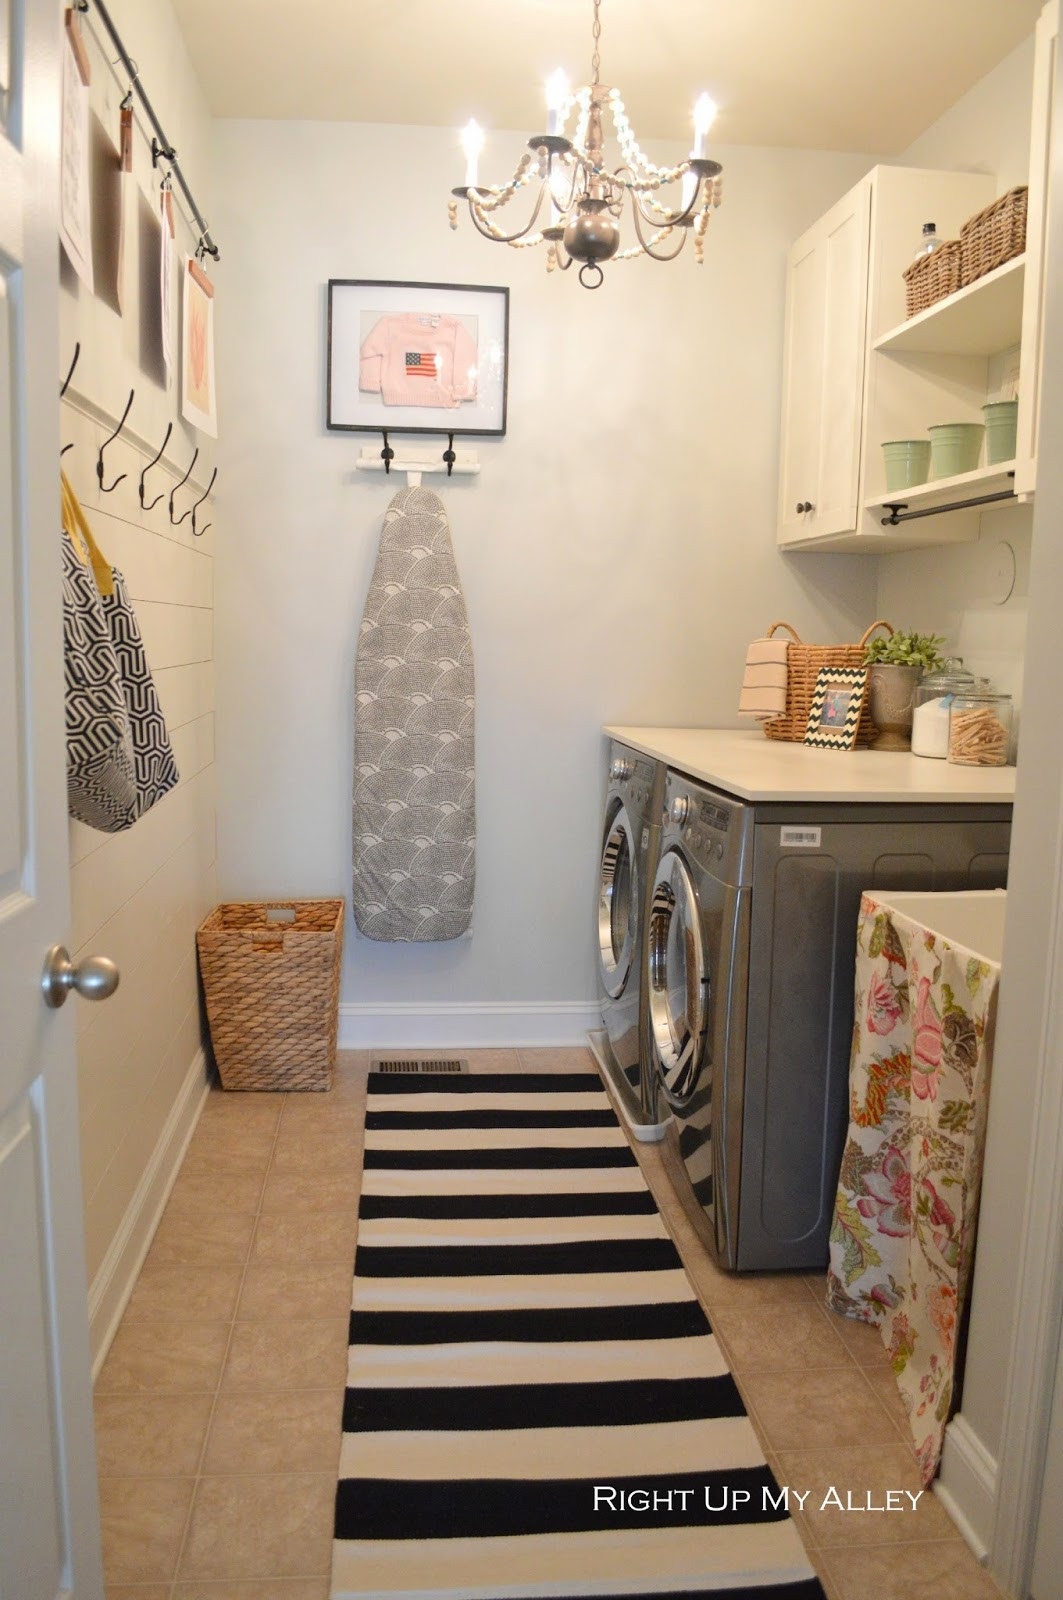 DIY Laundry Room Decor
 Right up my alley DIY Wood Bead Chandelier